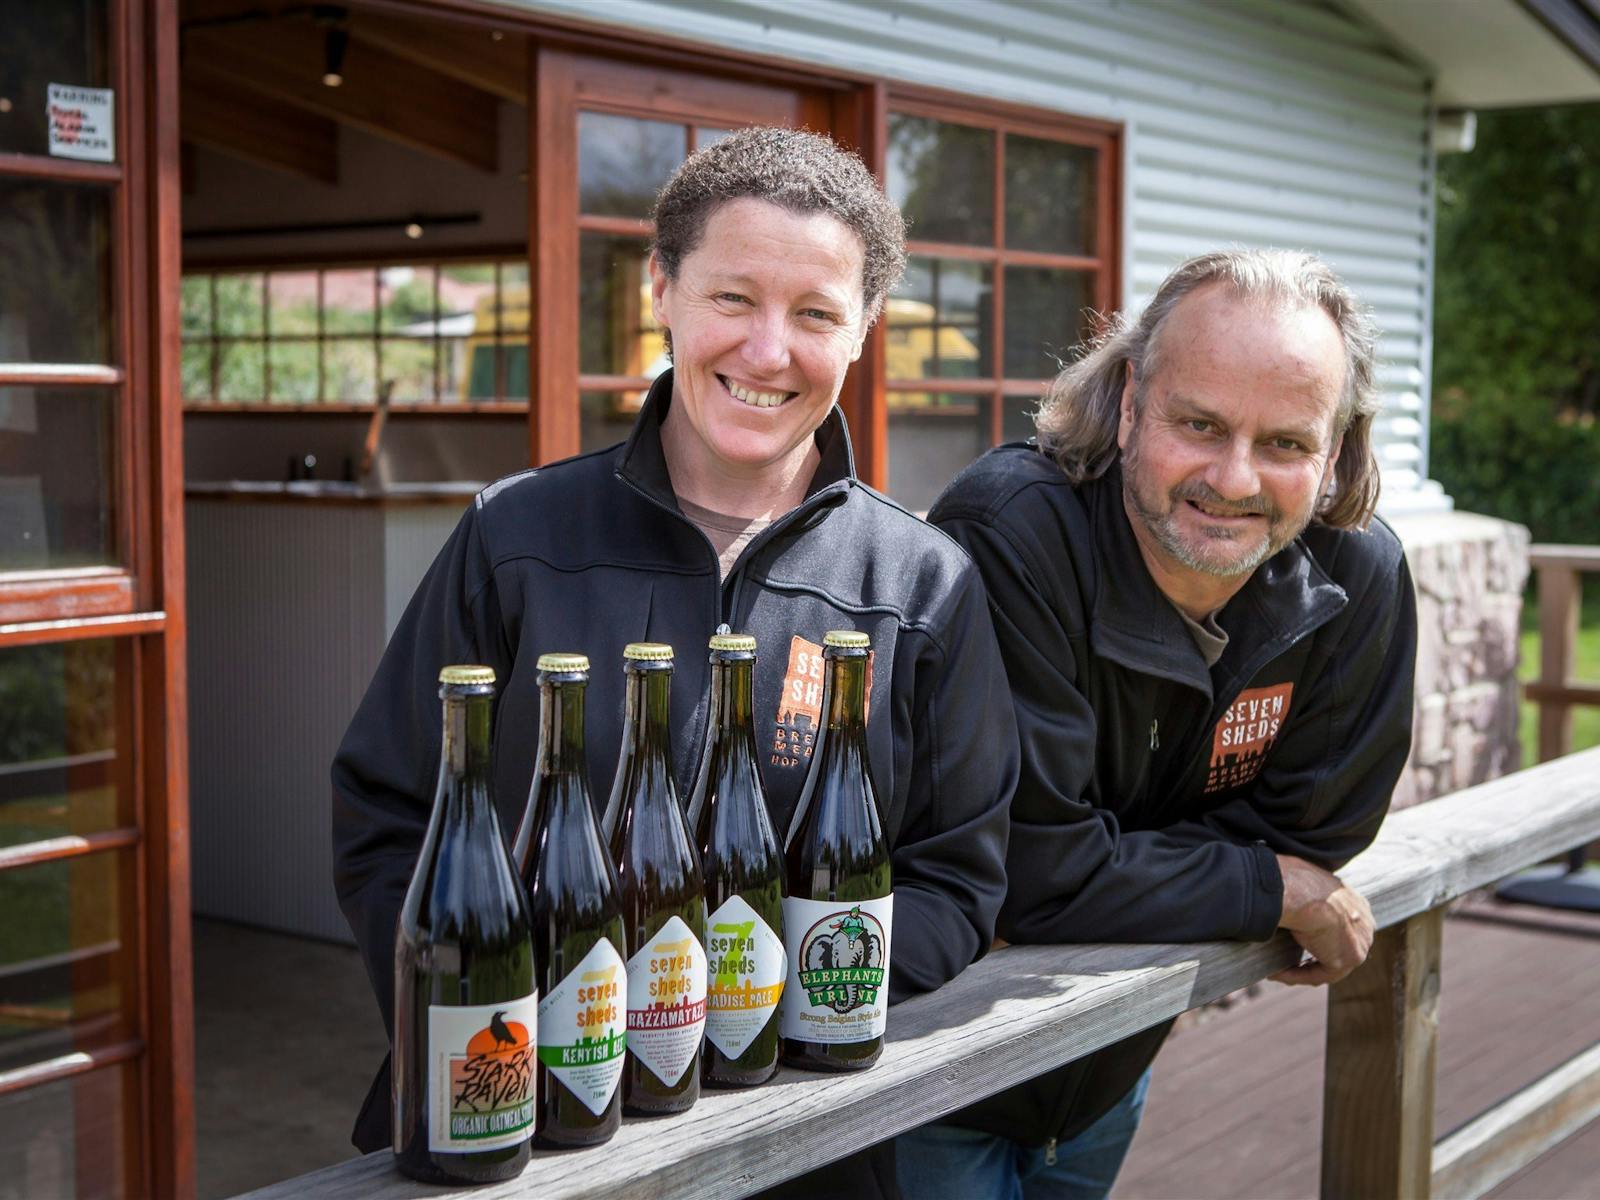 Owners Catherine & Willie leaning on a railing with five bottles of Seven Sheds beer.